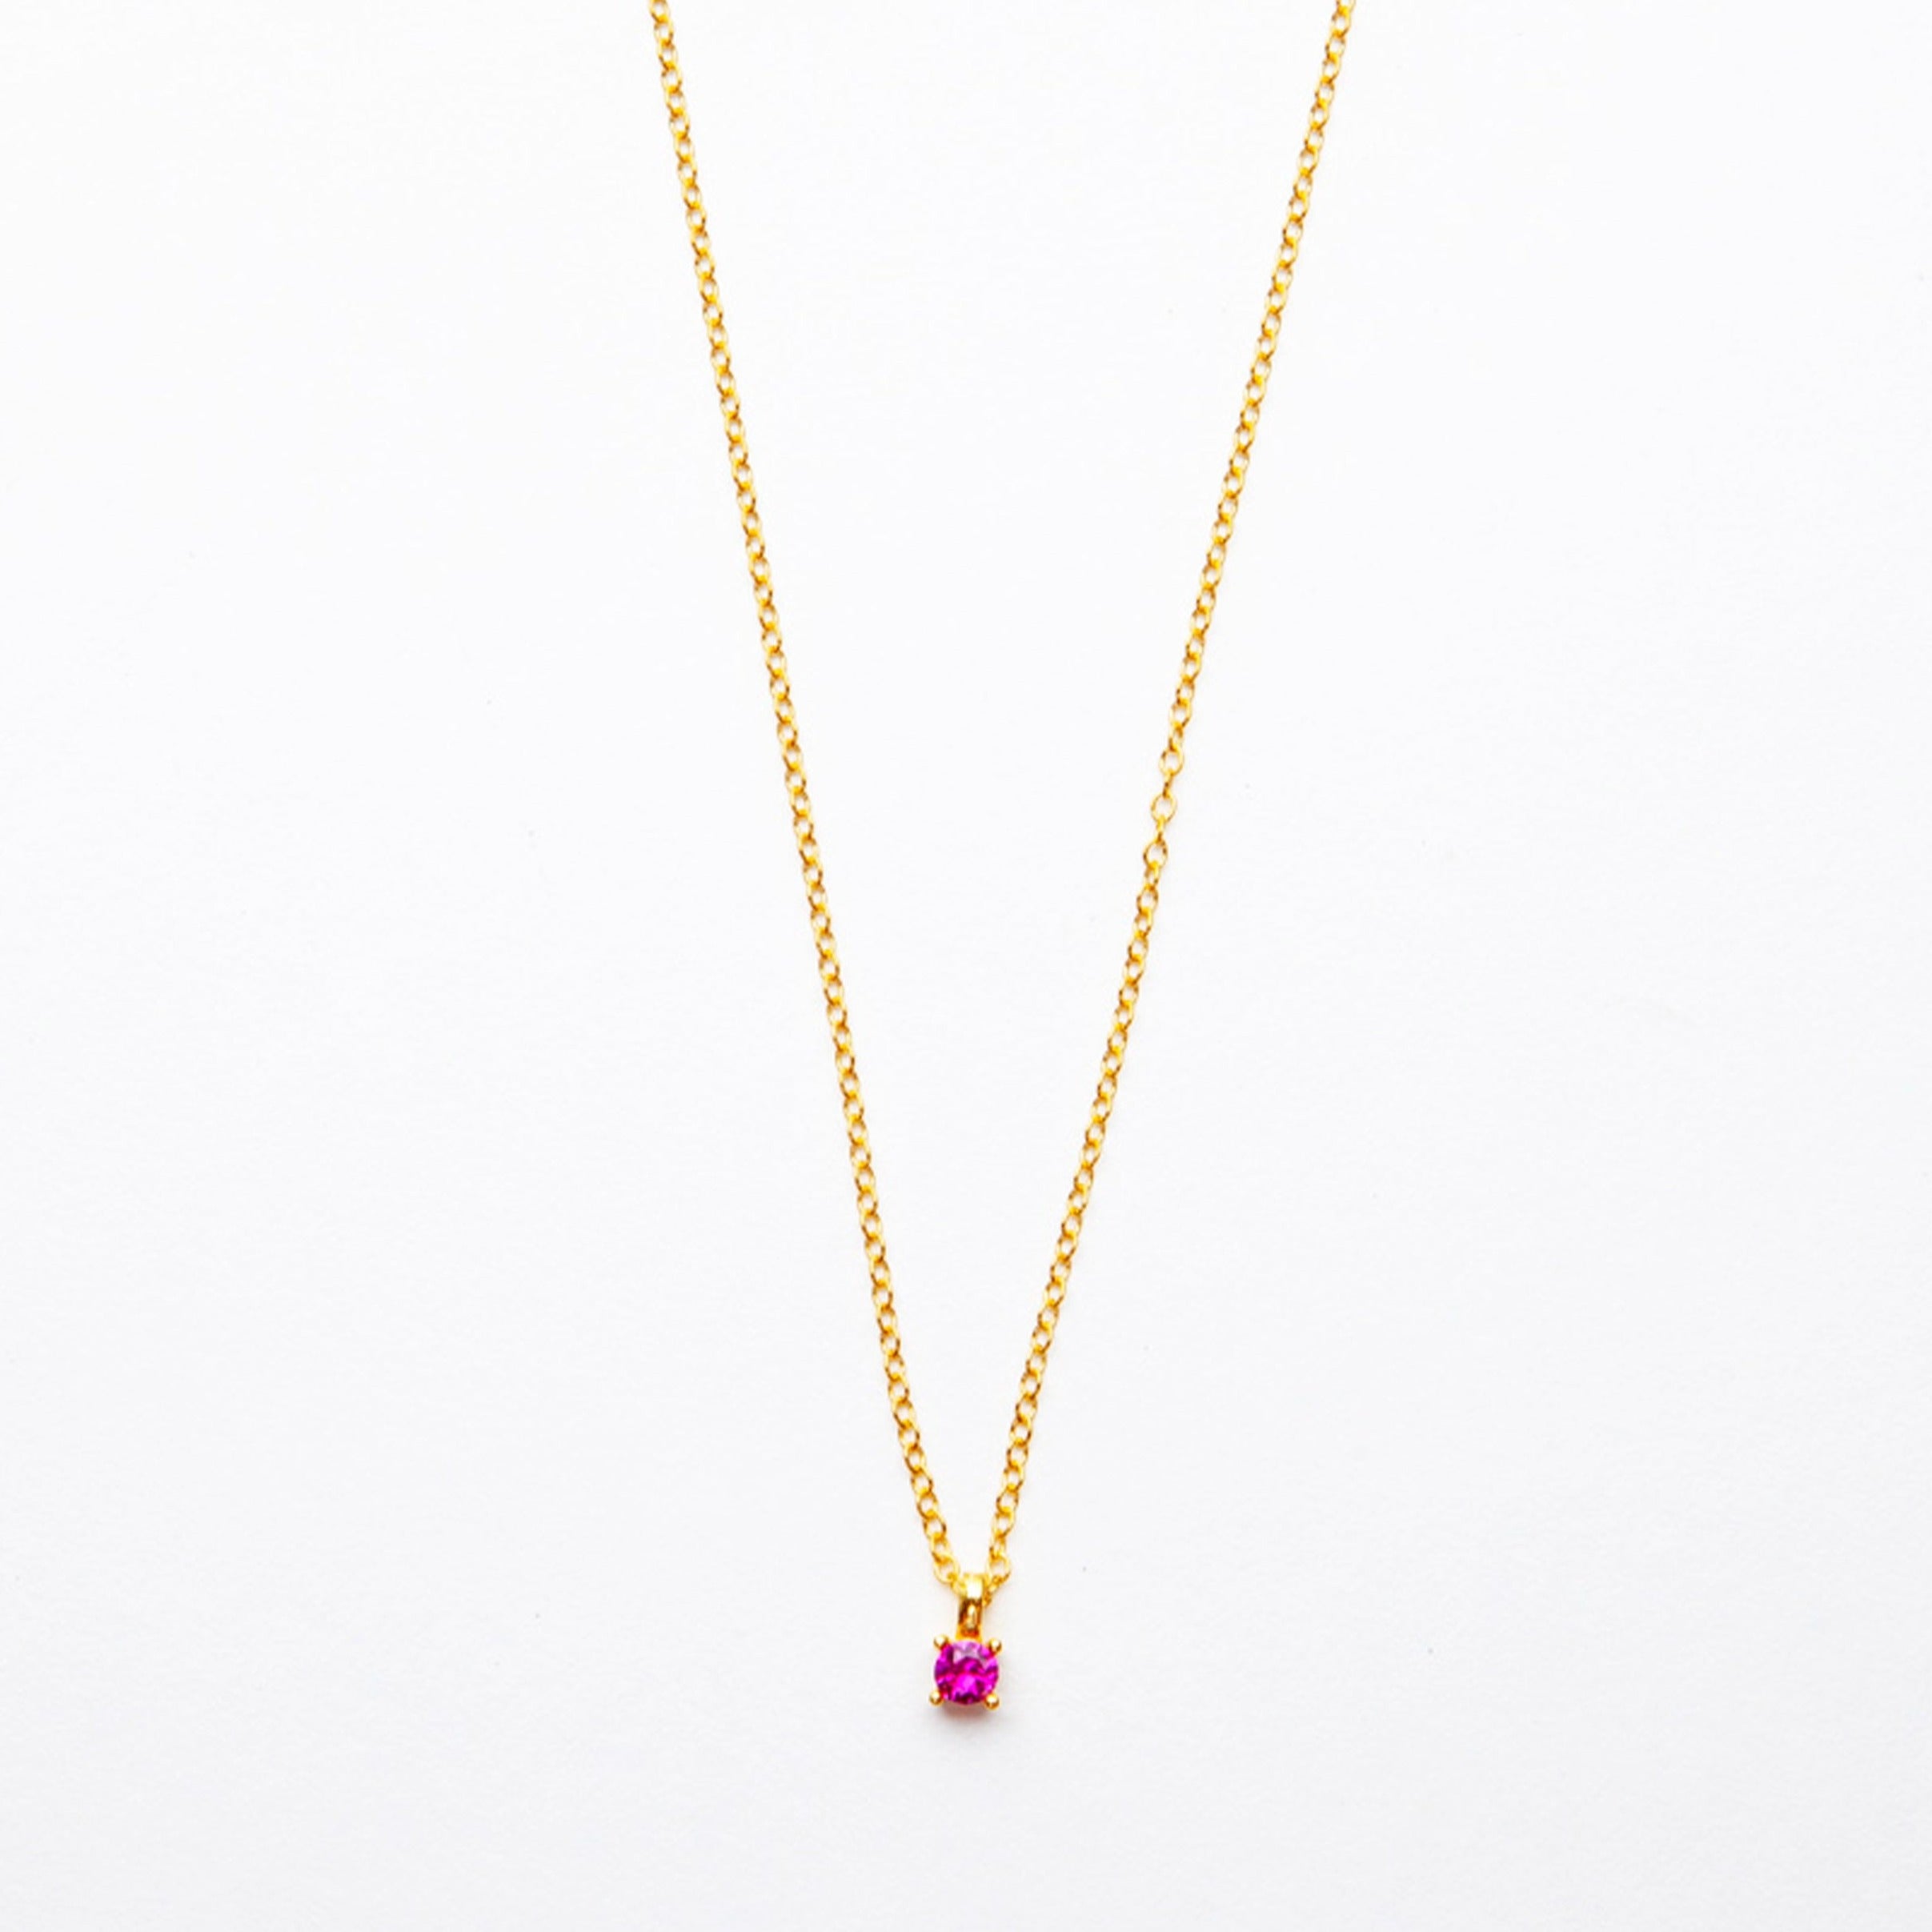 Isla Necklace in Hot Pink